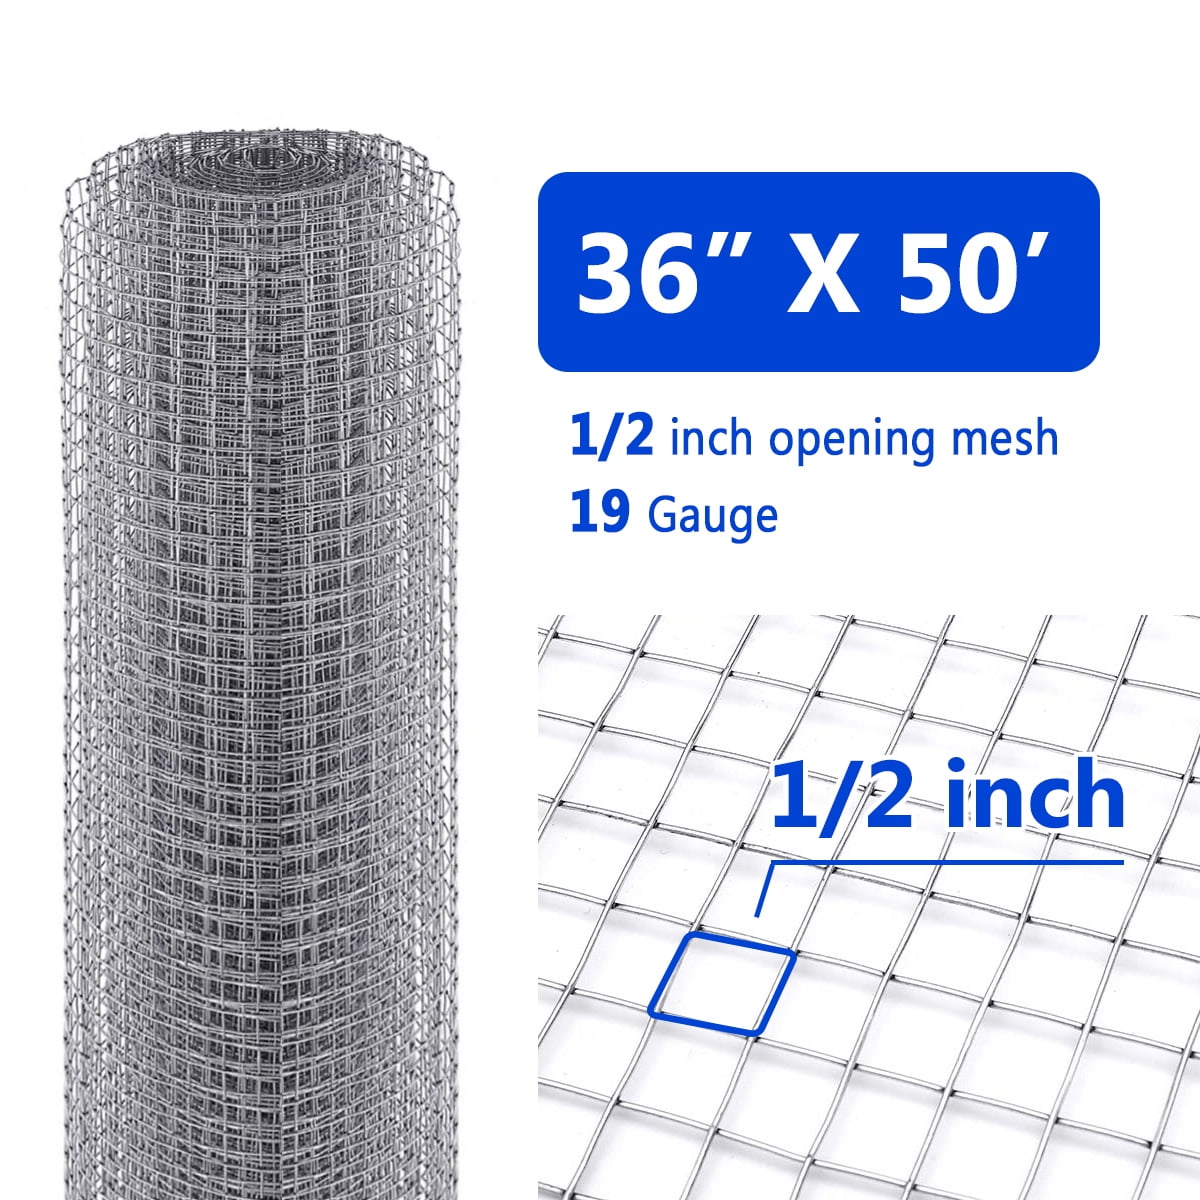 14 Gauge MANY SIZES & MESH OPTIONS Galvanized Welded Wire Mesh Cage Fence 